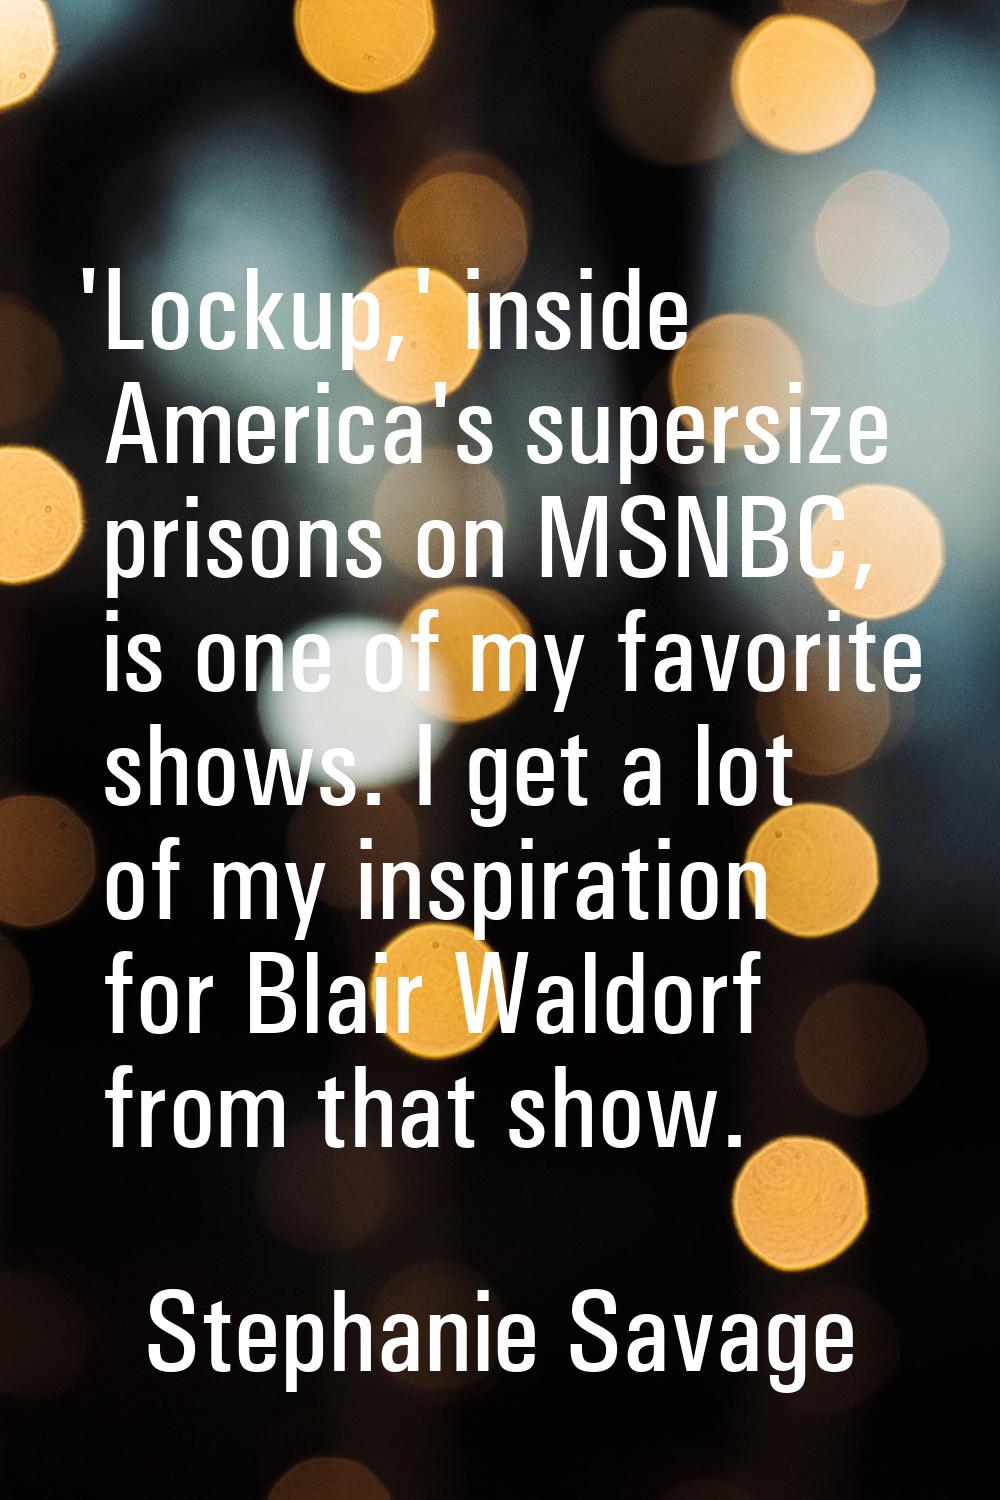 'Lockup,' inside America's supersize prisons on MSNBC, is one of my favorite shows. I get a lot of 